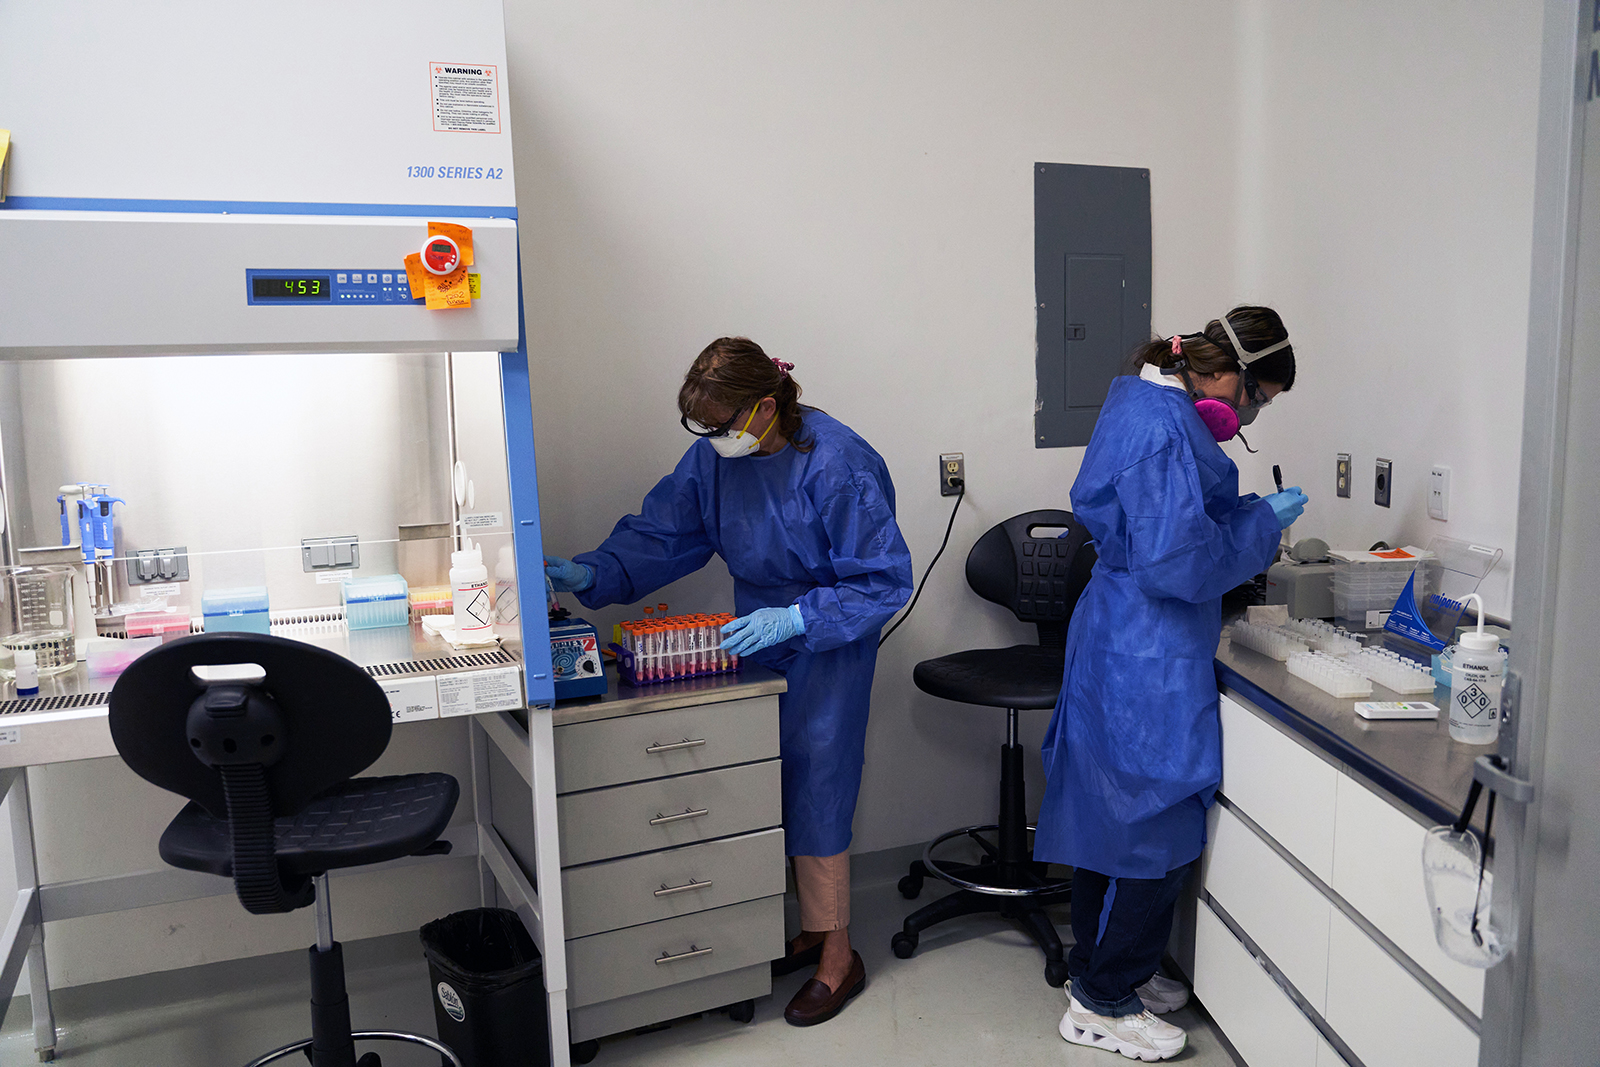 Pharmaceutical biochemists process Covd-19 tests at a laboratory at the Autonomous University of San Luis Potosi (UASLP) Research Center in Health Sciences and Biomedicine in San Luis Potosi, Mexico, on Friday, July 24.